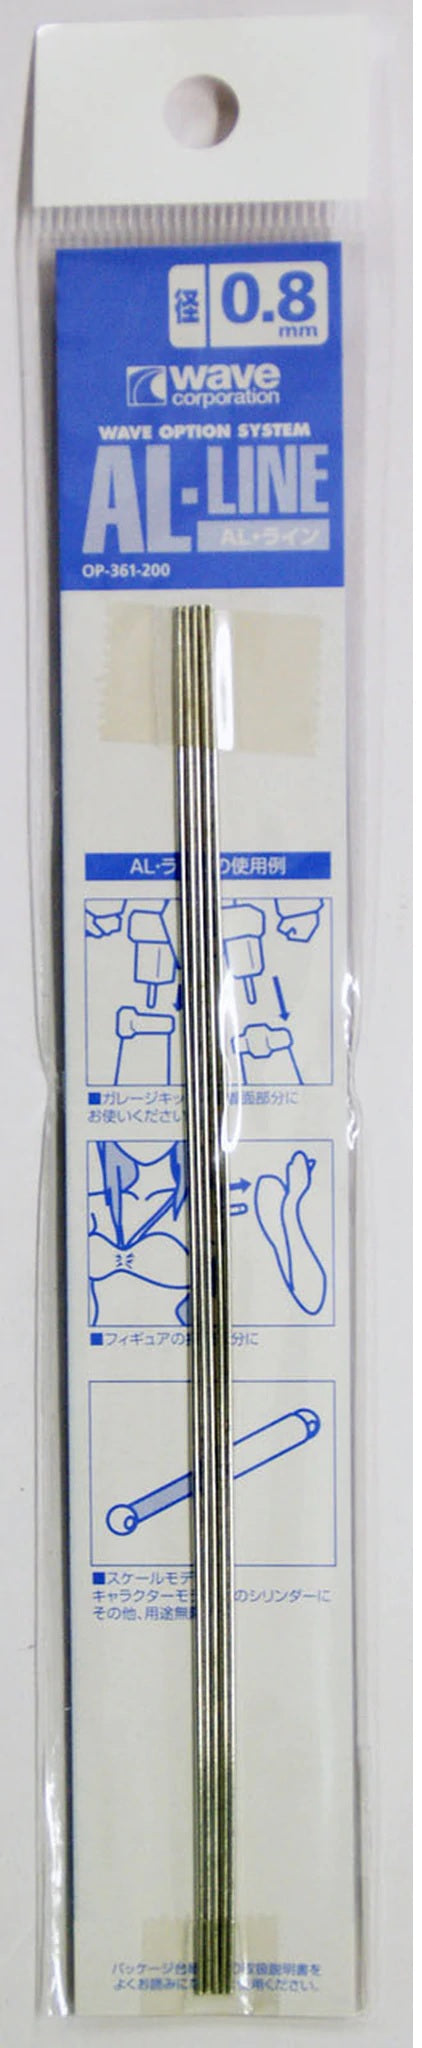 Wave AL LINE (0.8mm) - Aluminum Wire 0.8mm (5 Wires per Pack)